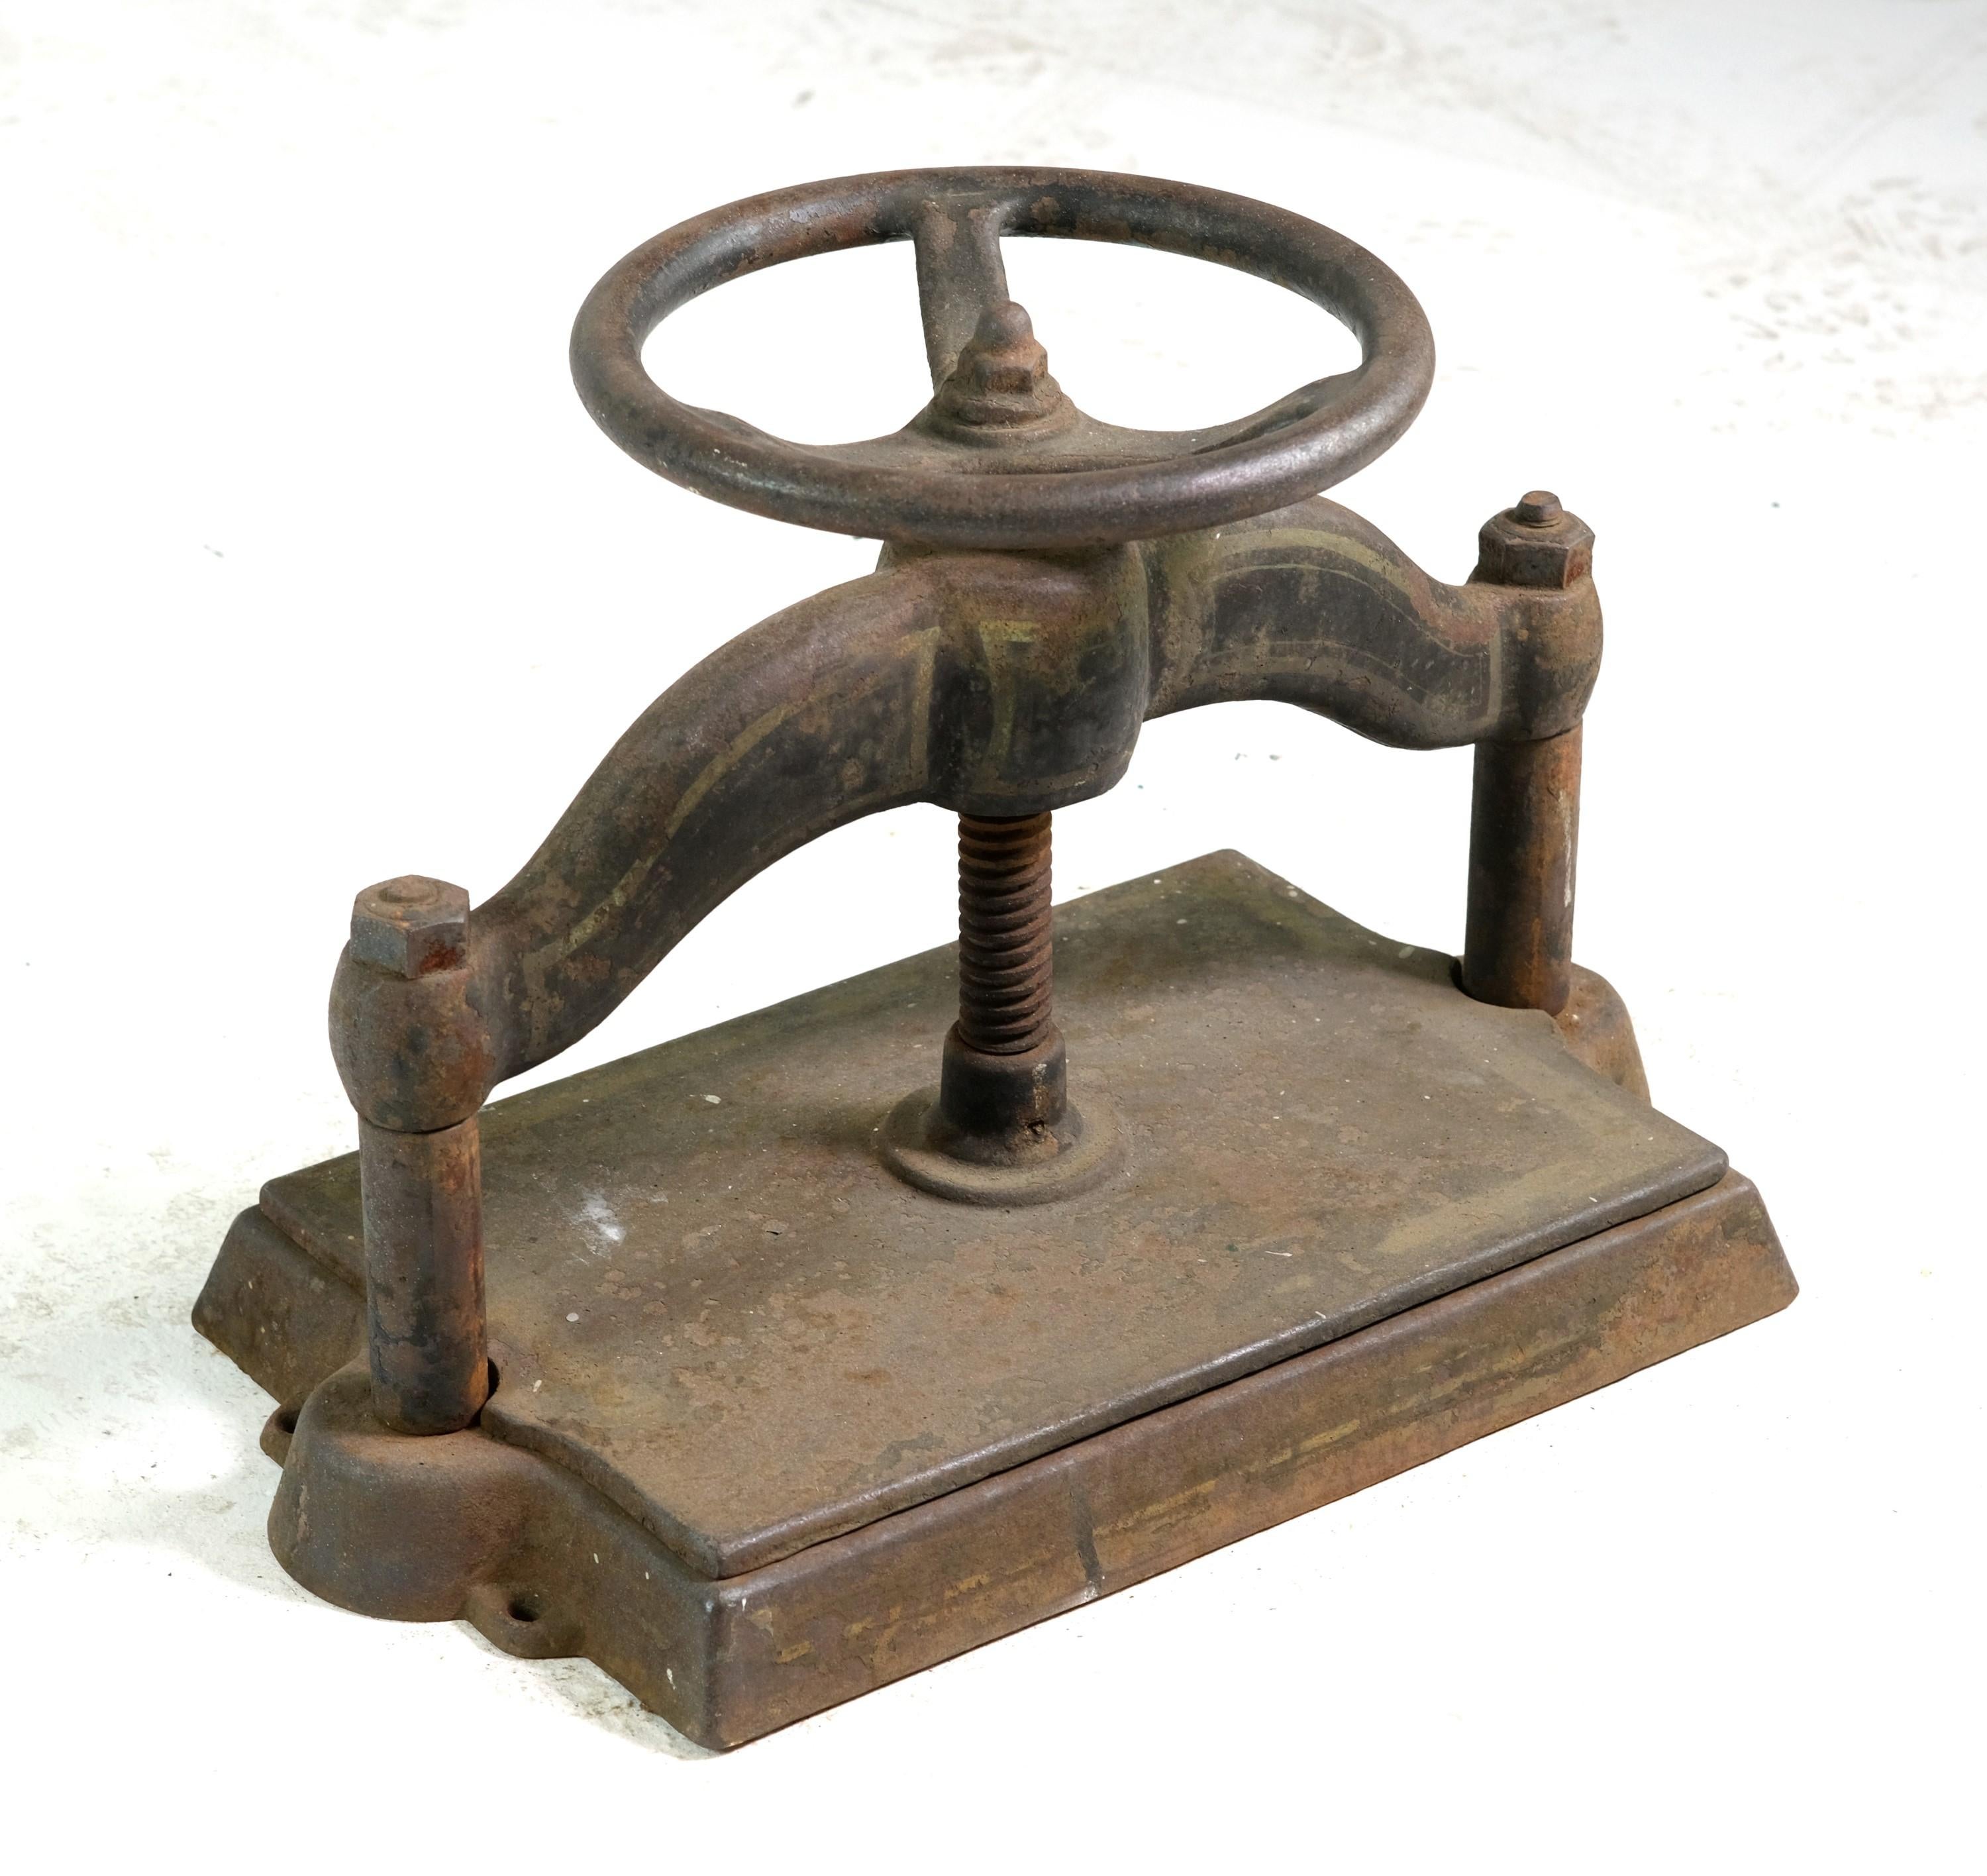 19th century antique Industrial cast iron book binding press. The handle spins well and the press up and down. Original patina. Please note, this item is located in our Scranton, PA location.